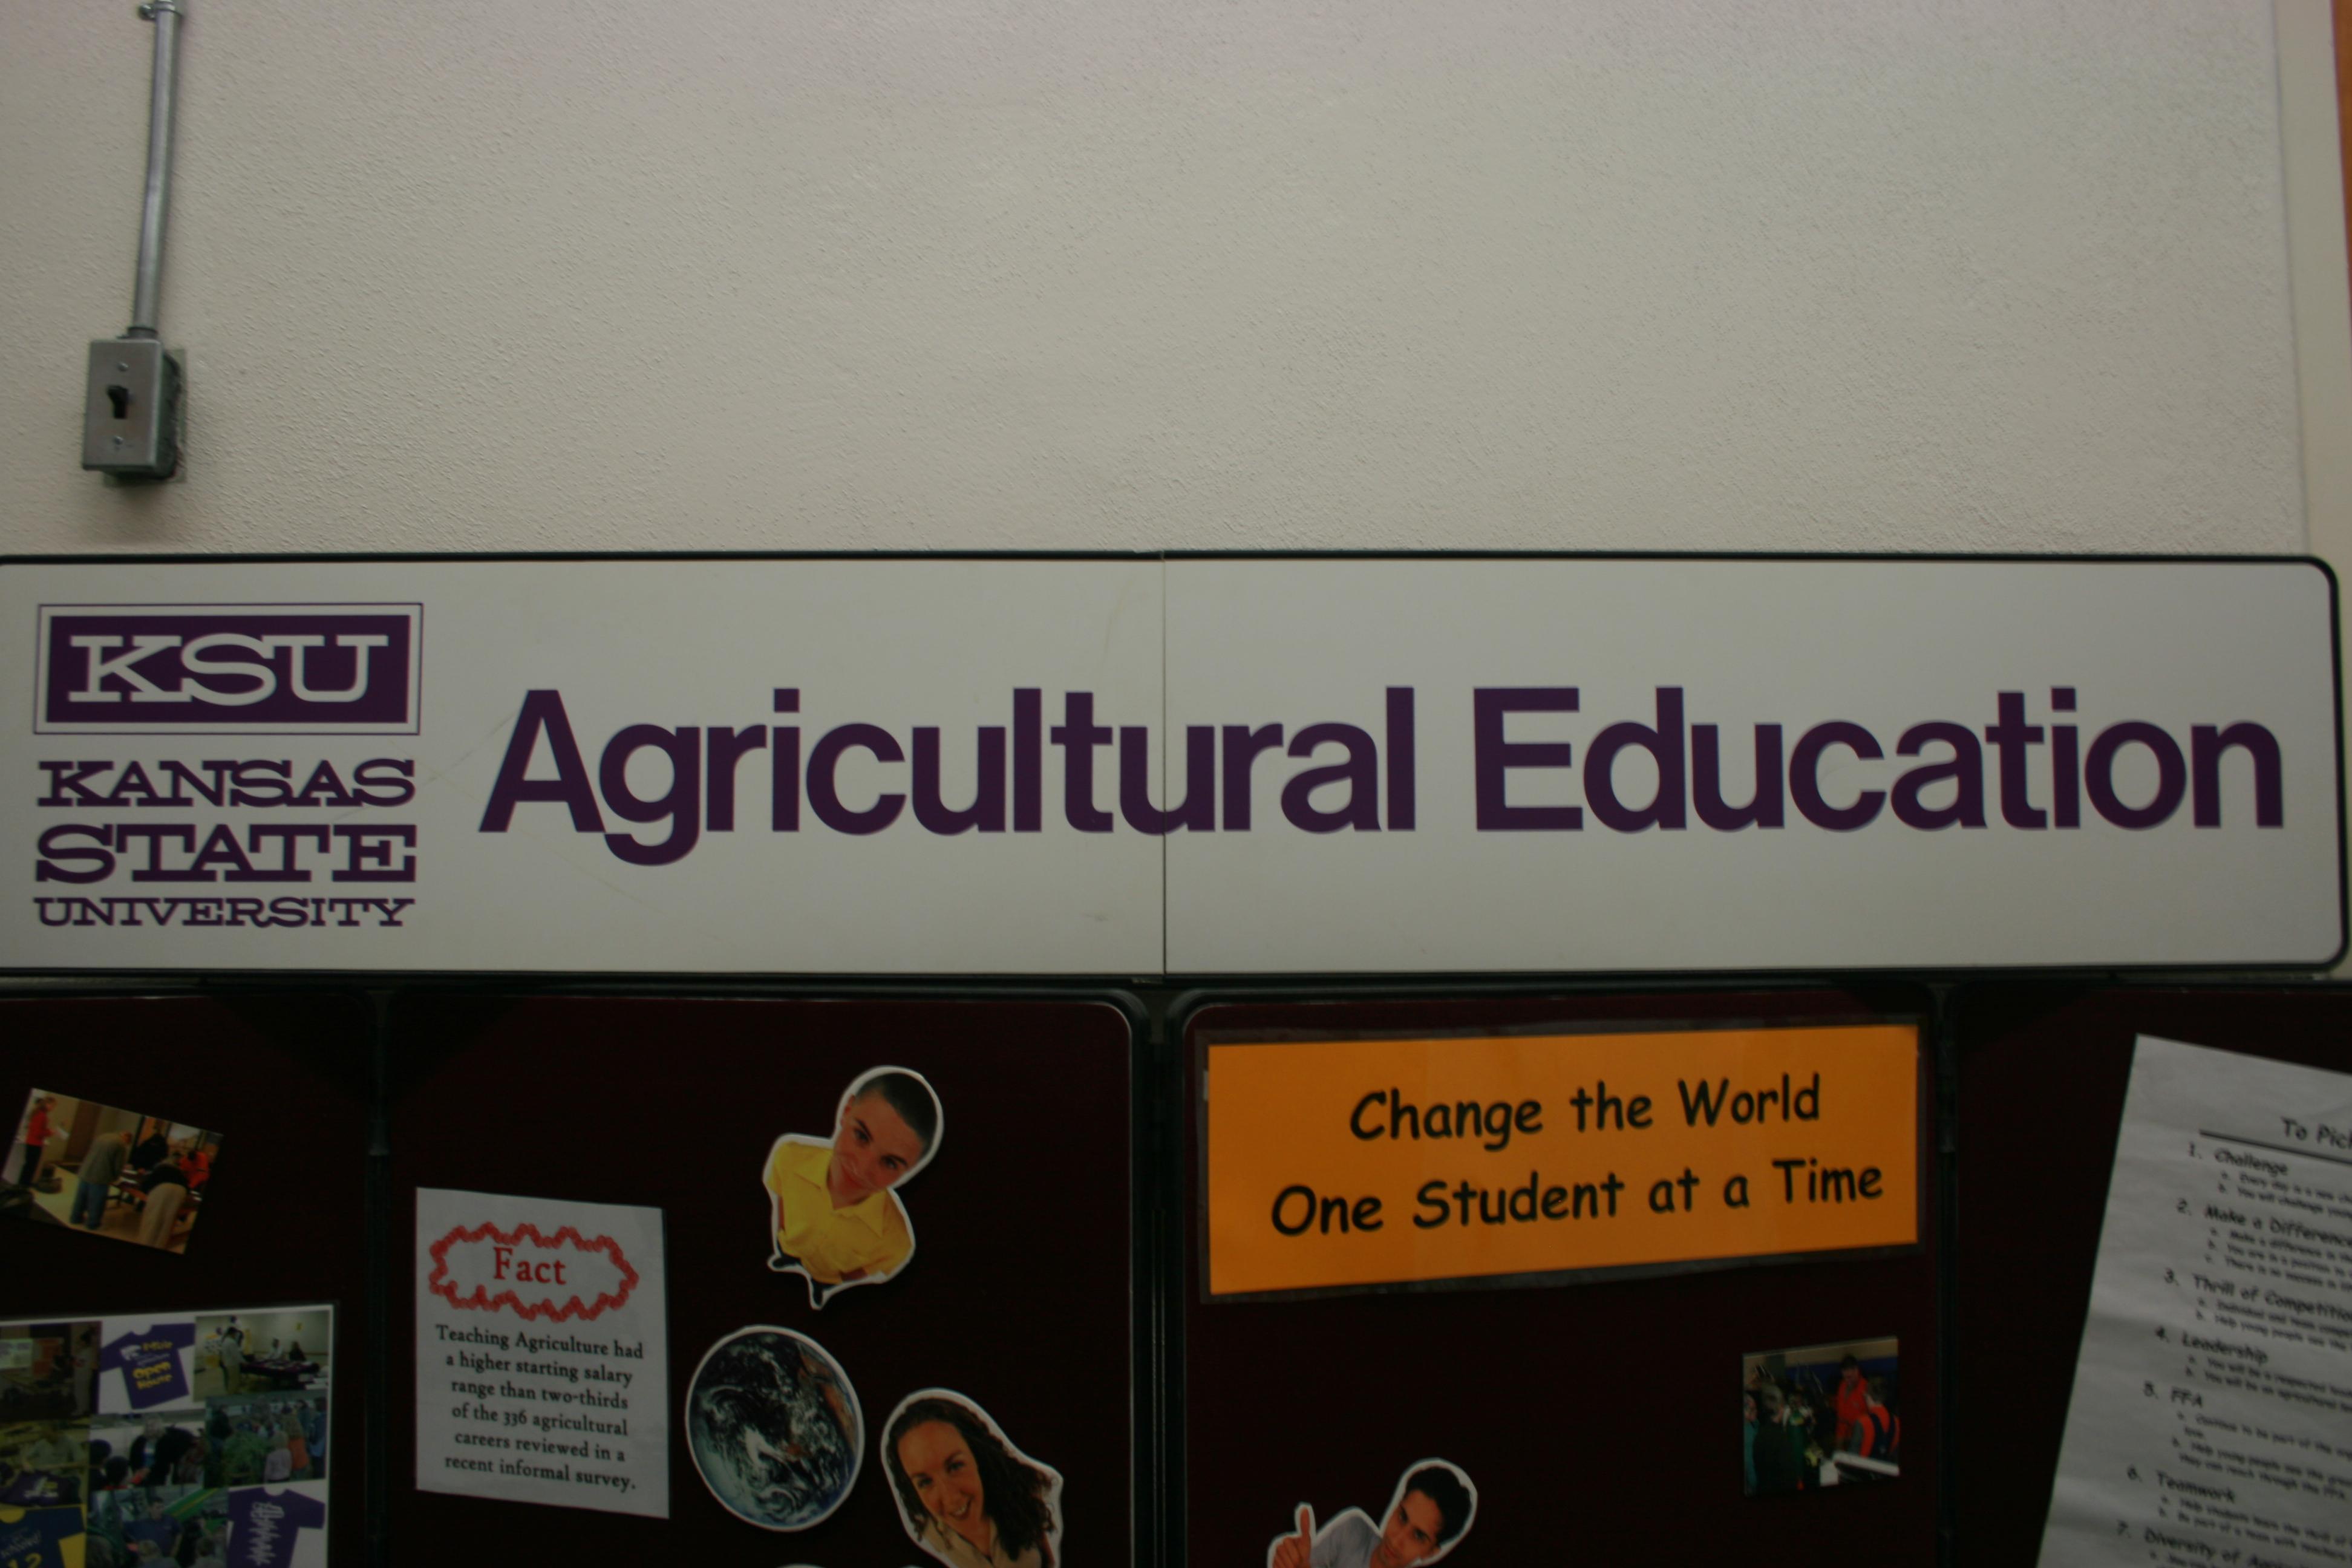 Agricultural Education Header Attachment to Display Board